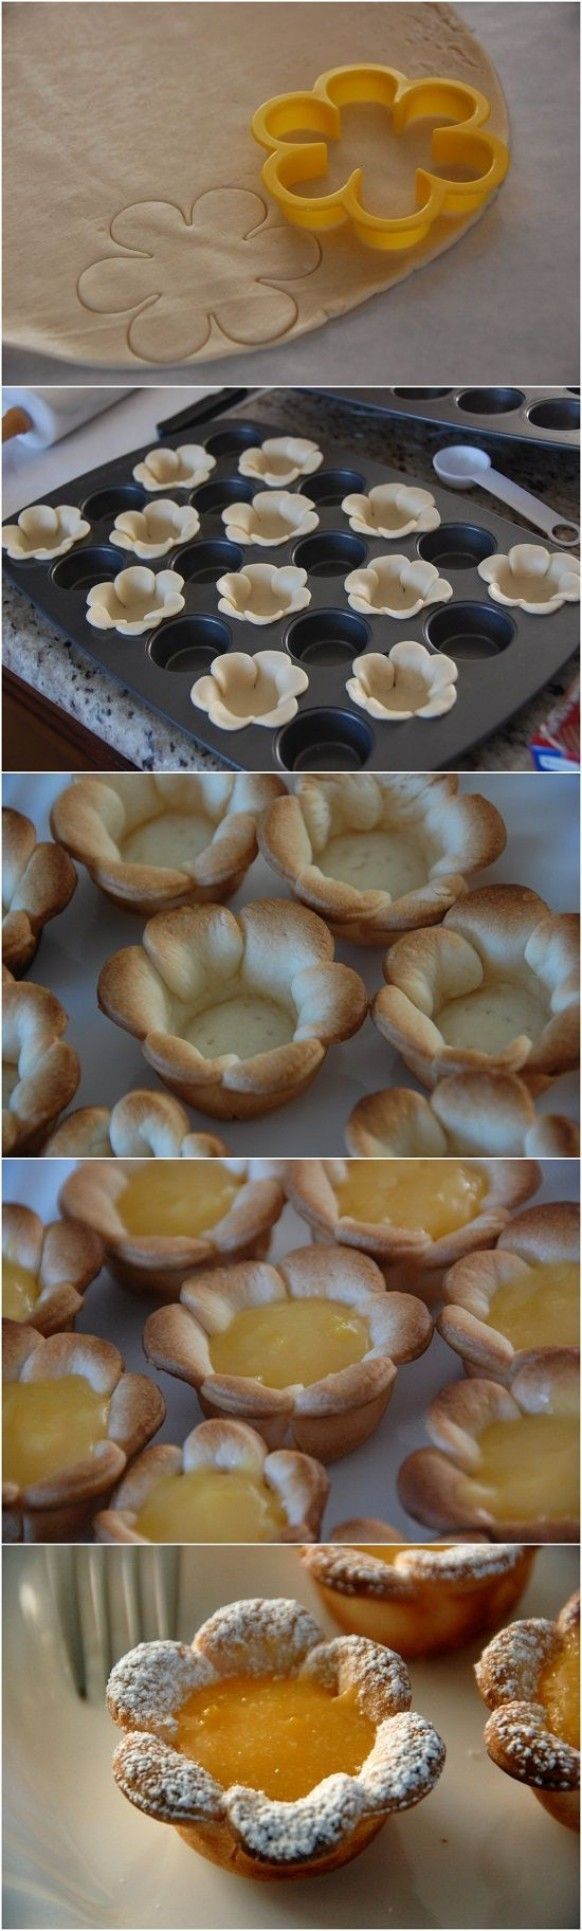 Flower pastry. Nice idea to put something in. Fresh fruits would be very nice for spring and summer :)